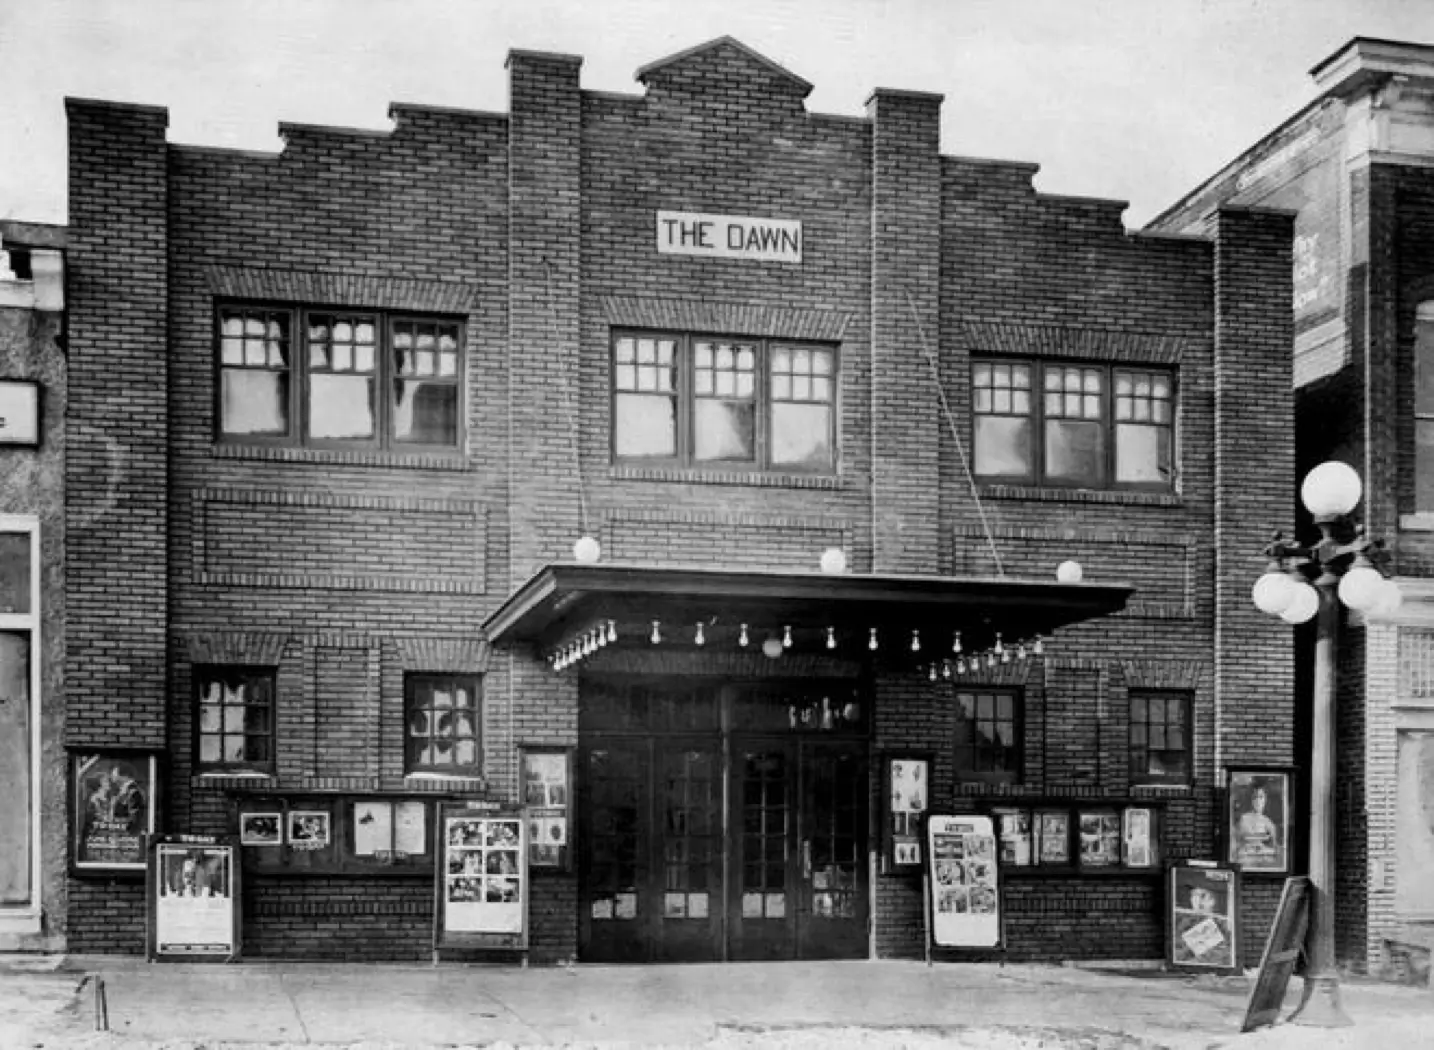 exterior of the original dawn theater from the early 1900s